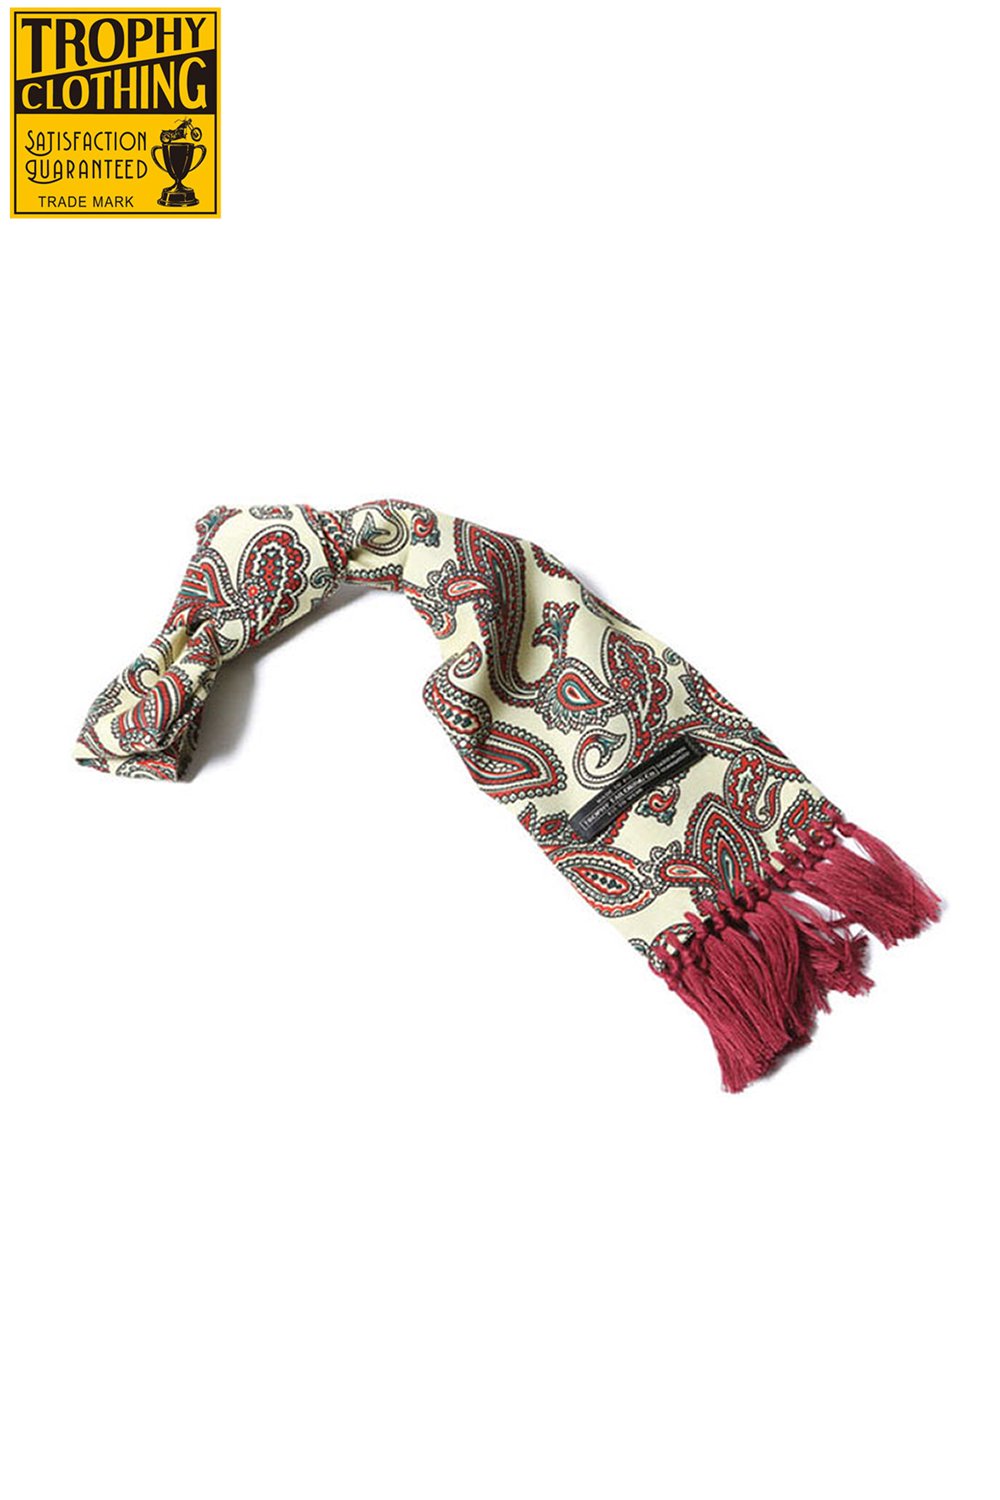 TROPHY CLOTHING(トロフィークロージング) スカーフ GENTS SCARF 